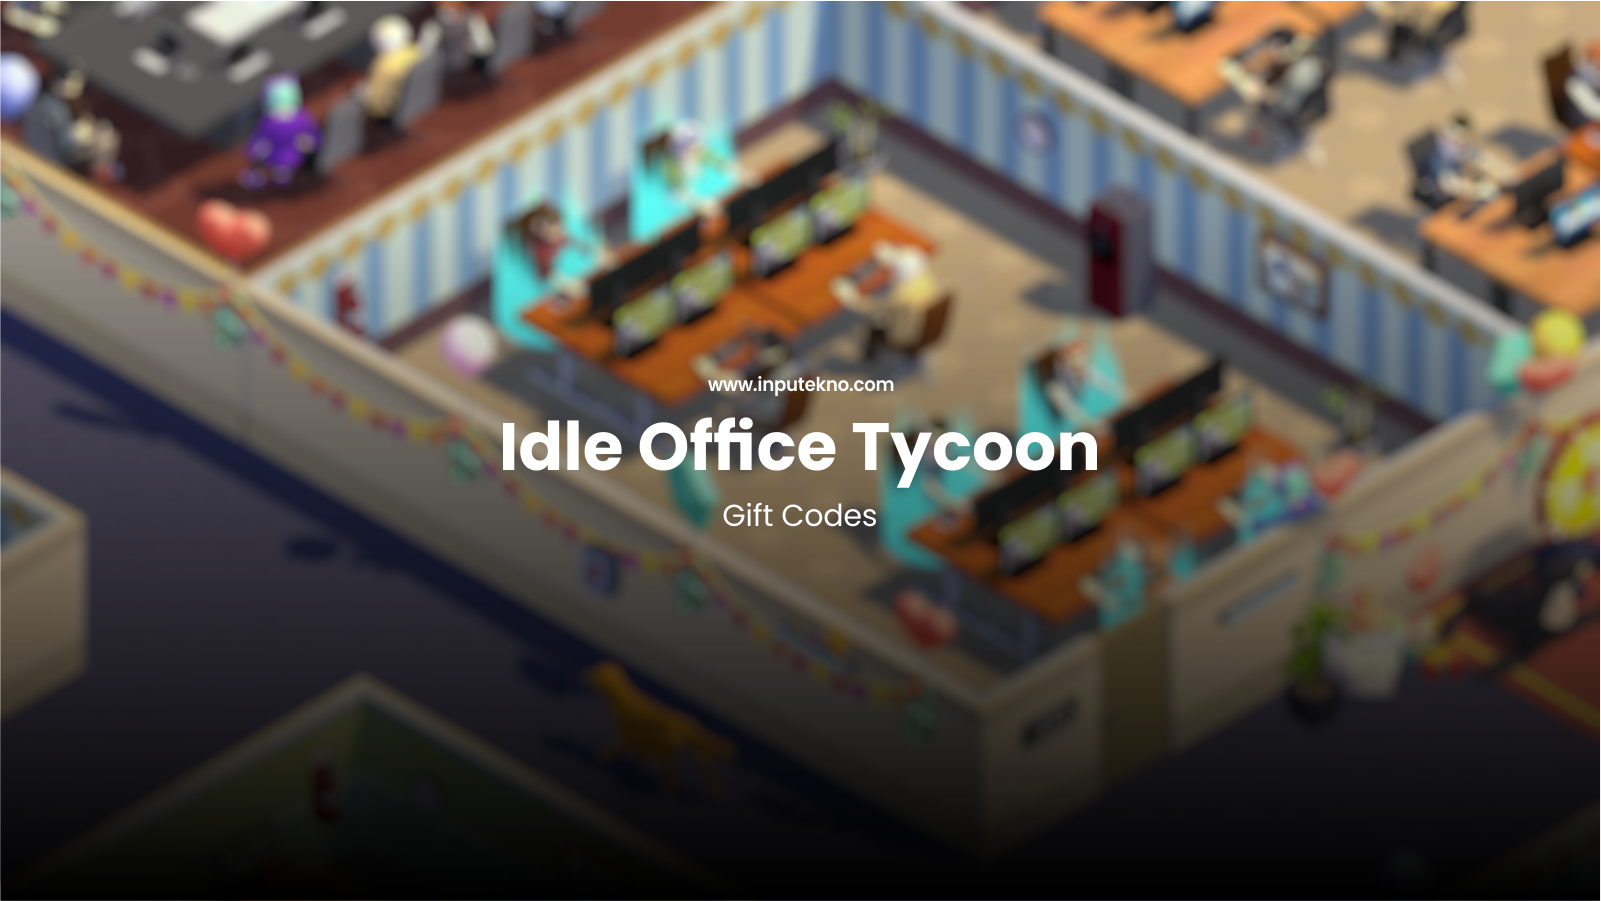 Idle office tycoon trucos